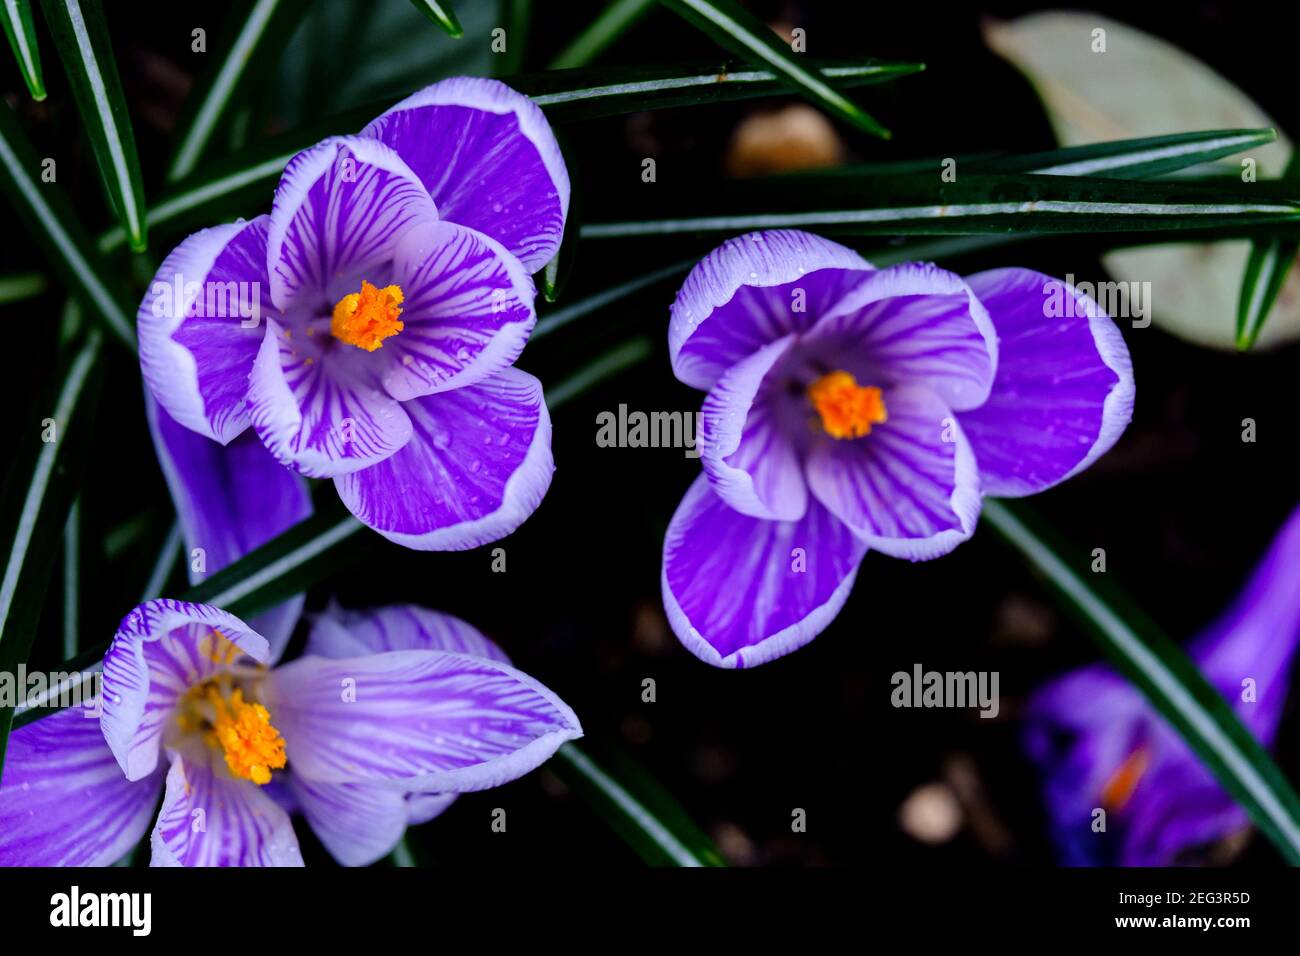 Close-up top view of purple woodland crocus flowers with white edges and stripes, seen from above, show off their brilliant orange centres. Stock Photo